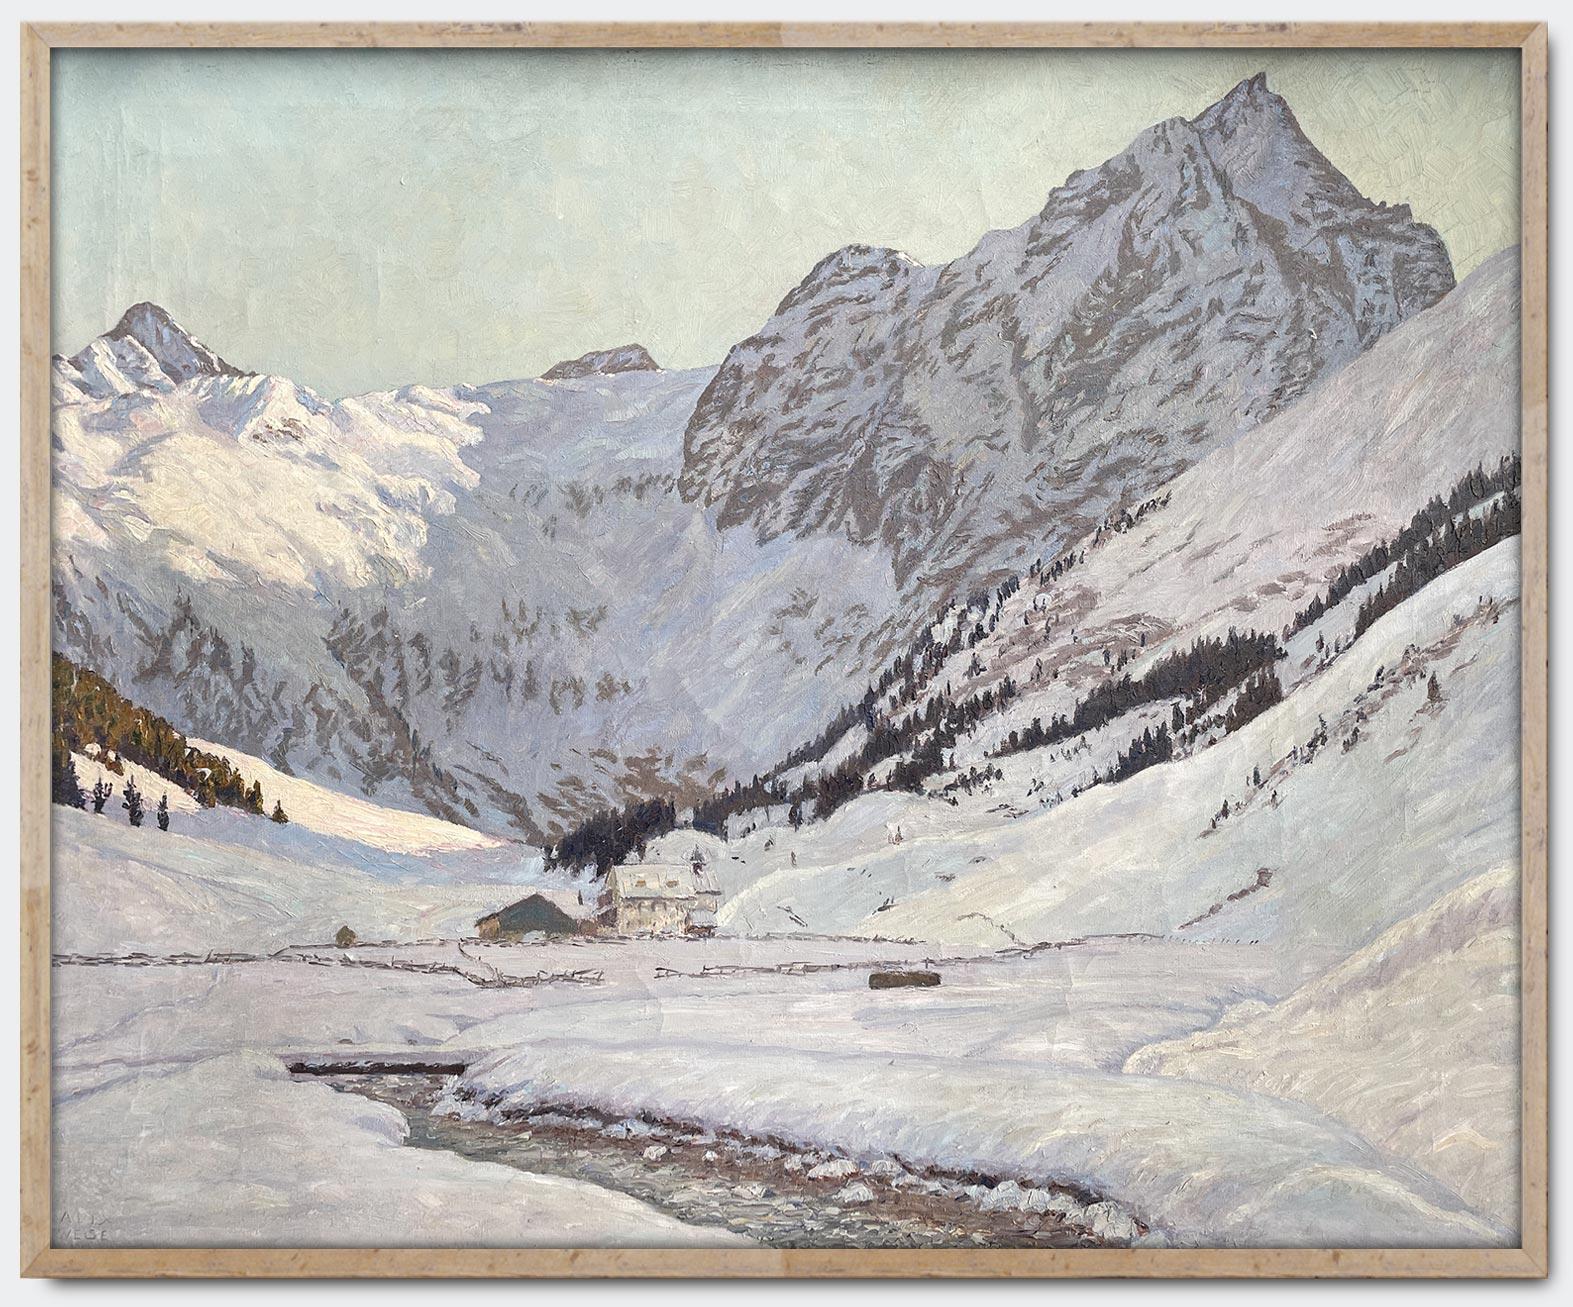 Snowy Landscape Oil On Canvas by Alex Weise - Dolomites 1930 For Sale 3